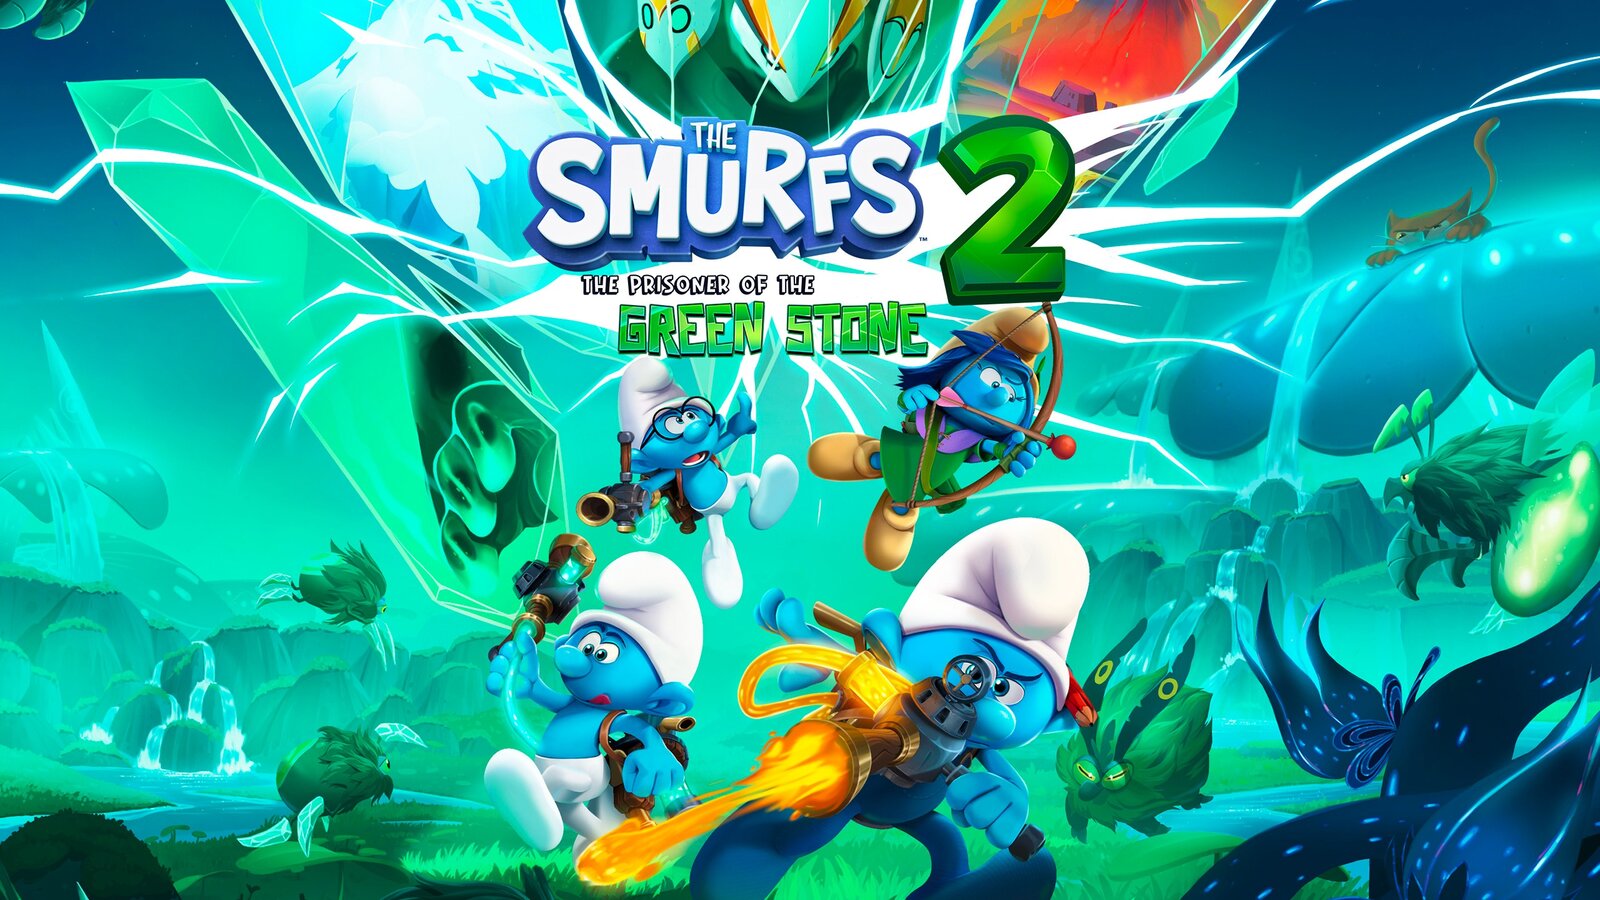 The Smurfs 2: The Prisoners of the Green Stone